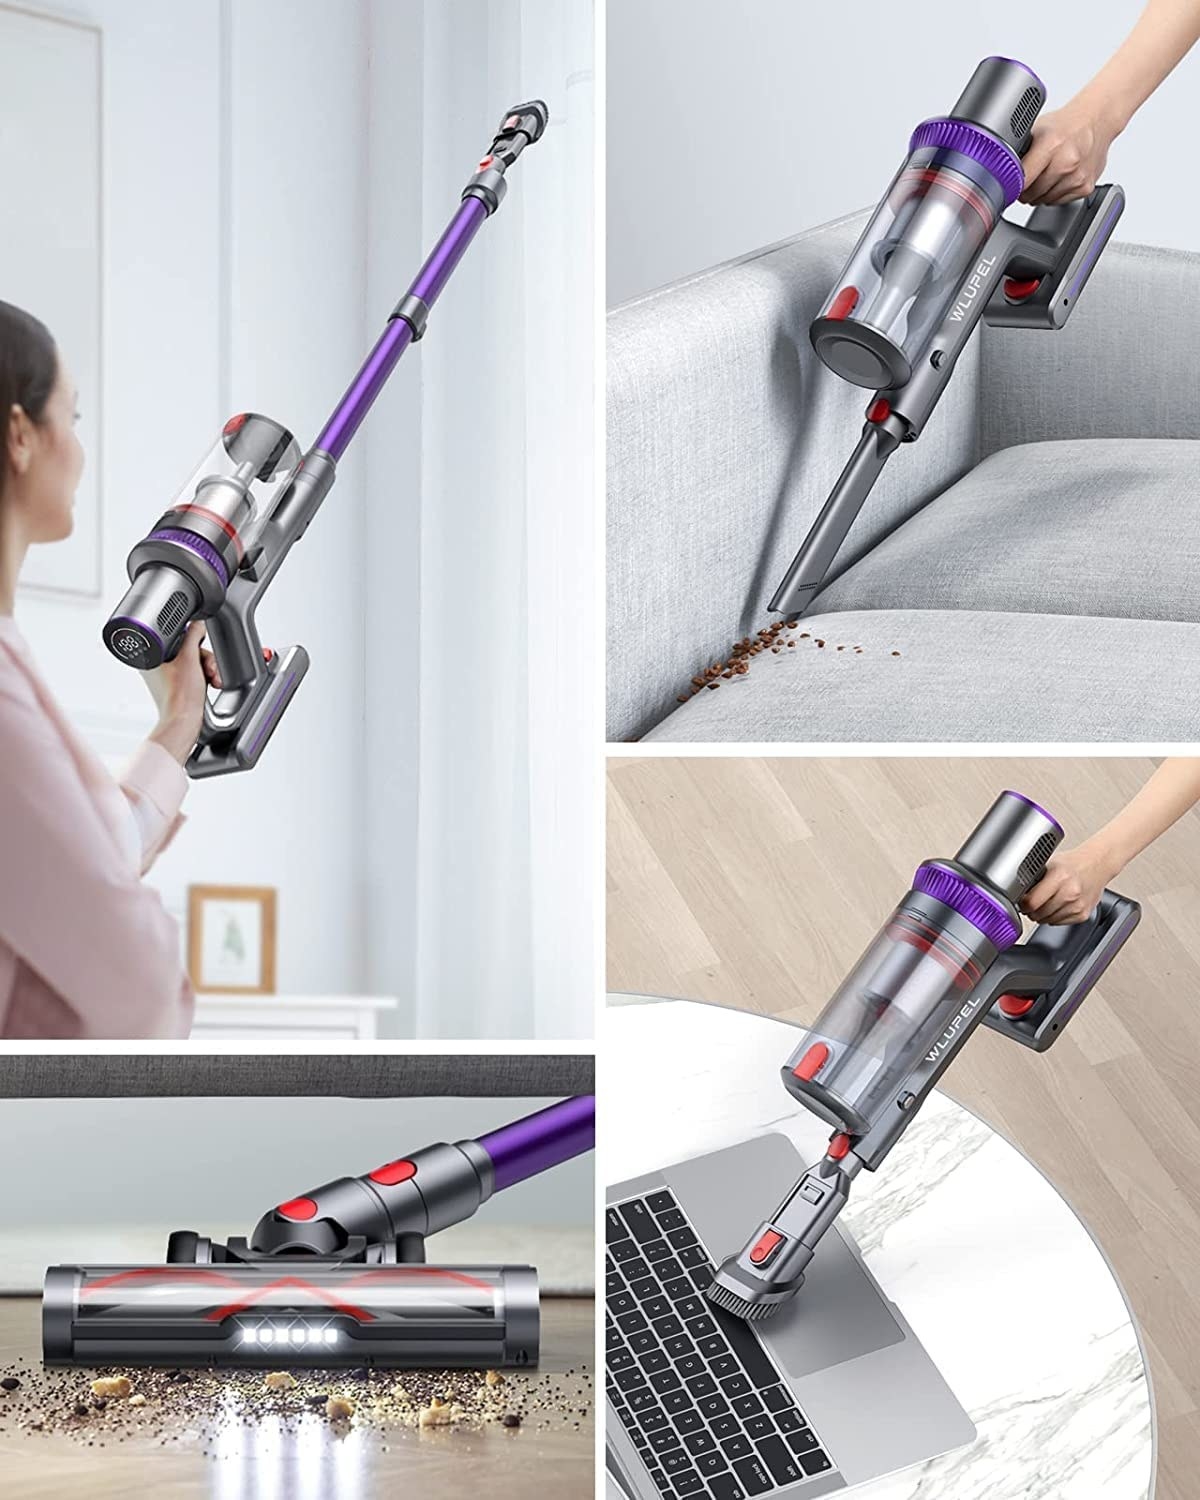 A cordless stick vacuum with an LED touchscreen display used on various surfaces